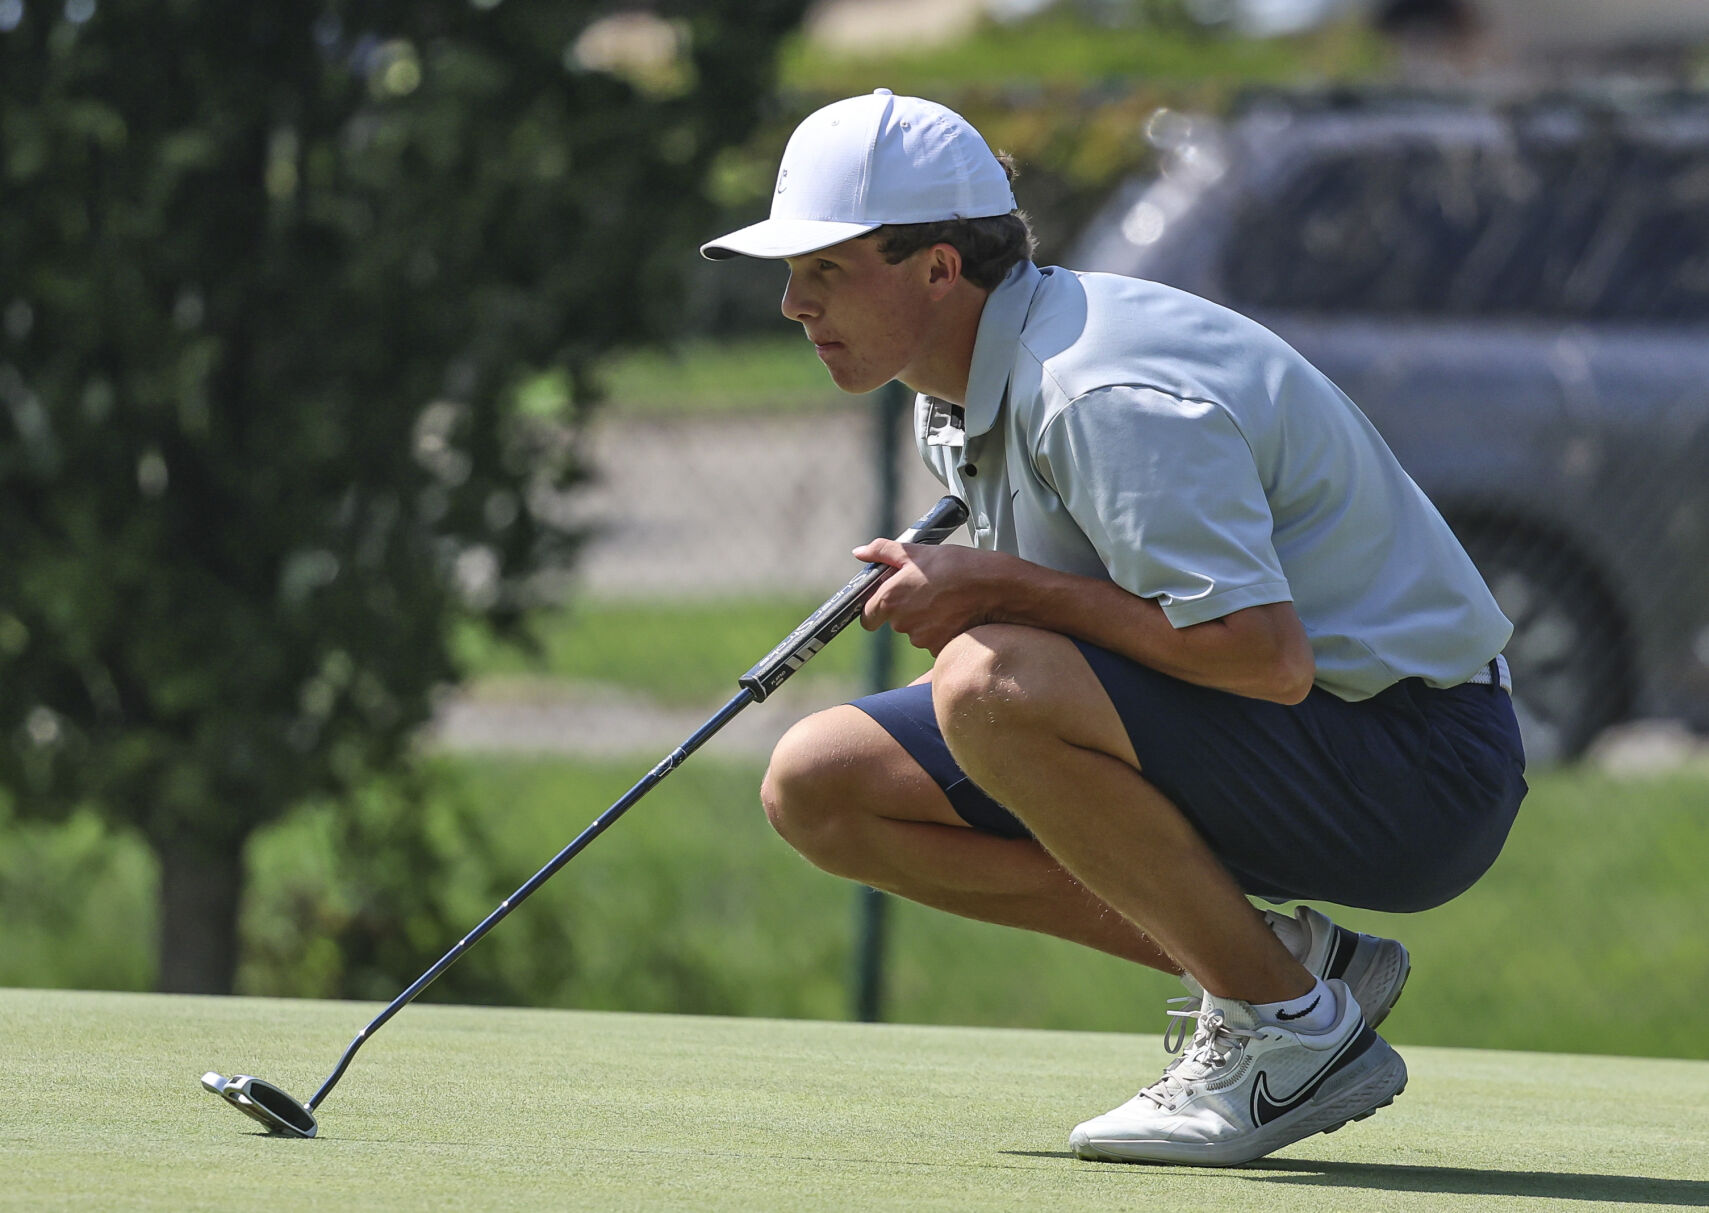 McClear finishes strong for 2nd straight State Amateur title